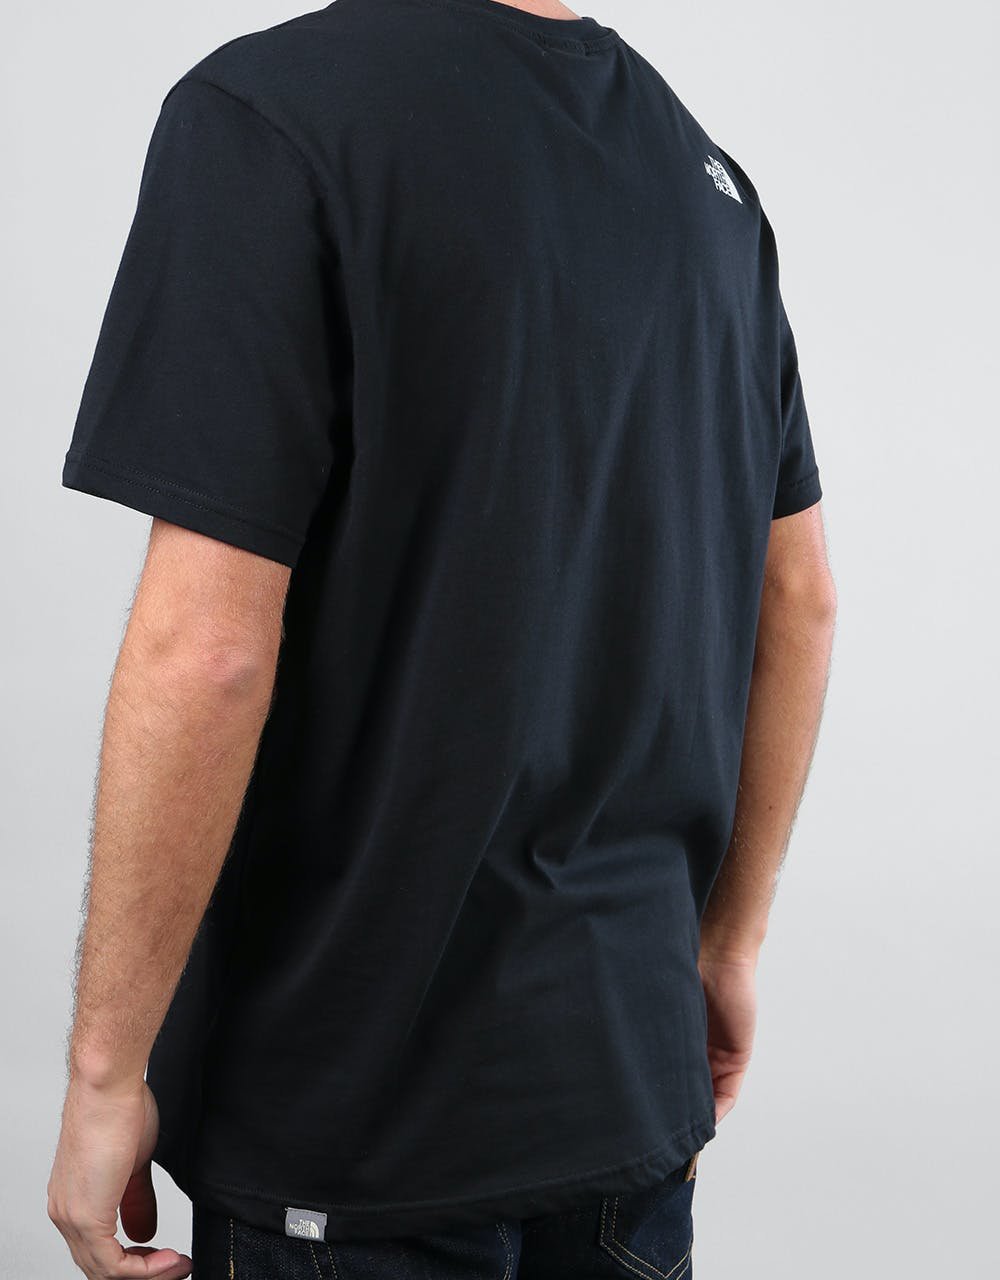 The North Face S/S Simple Dome T-Shirt - Black